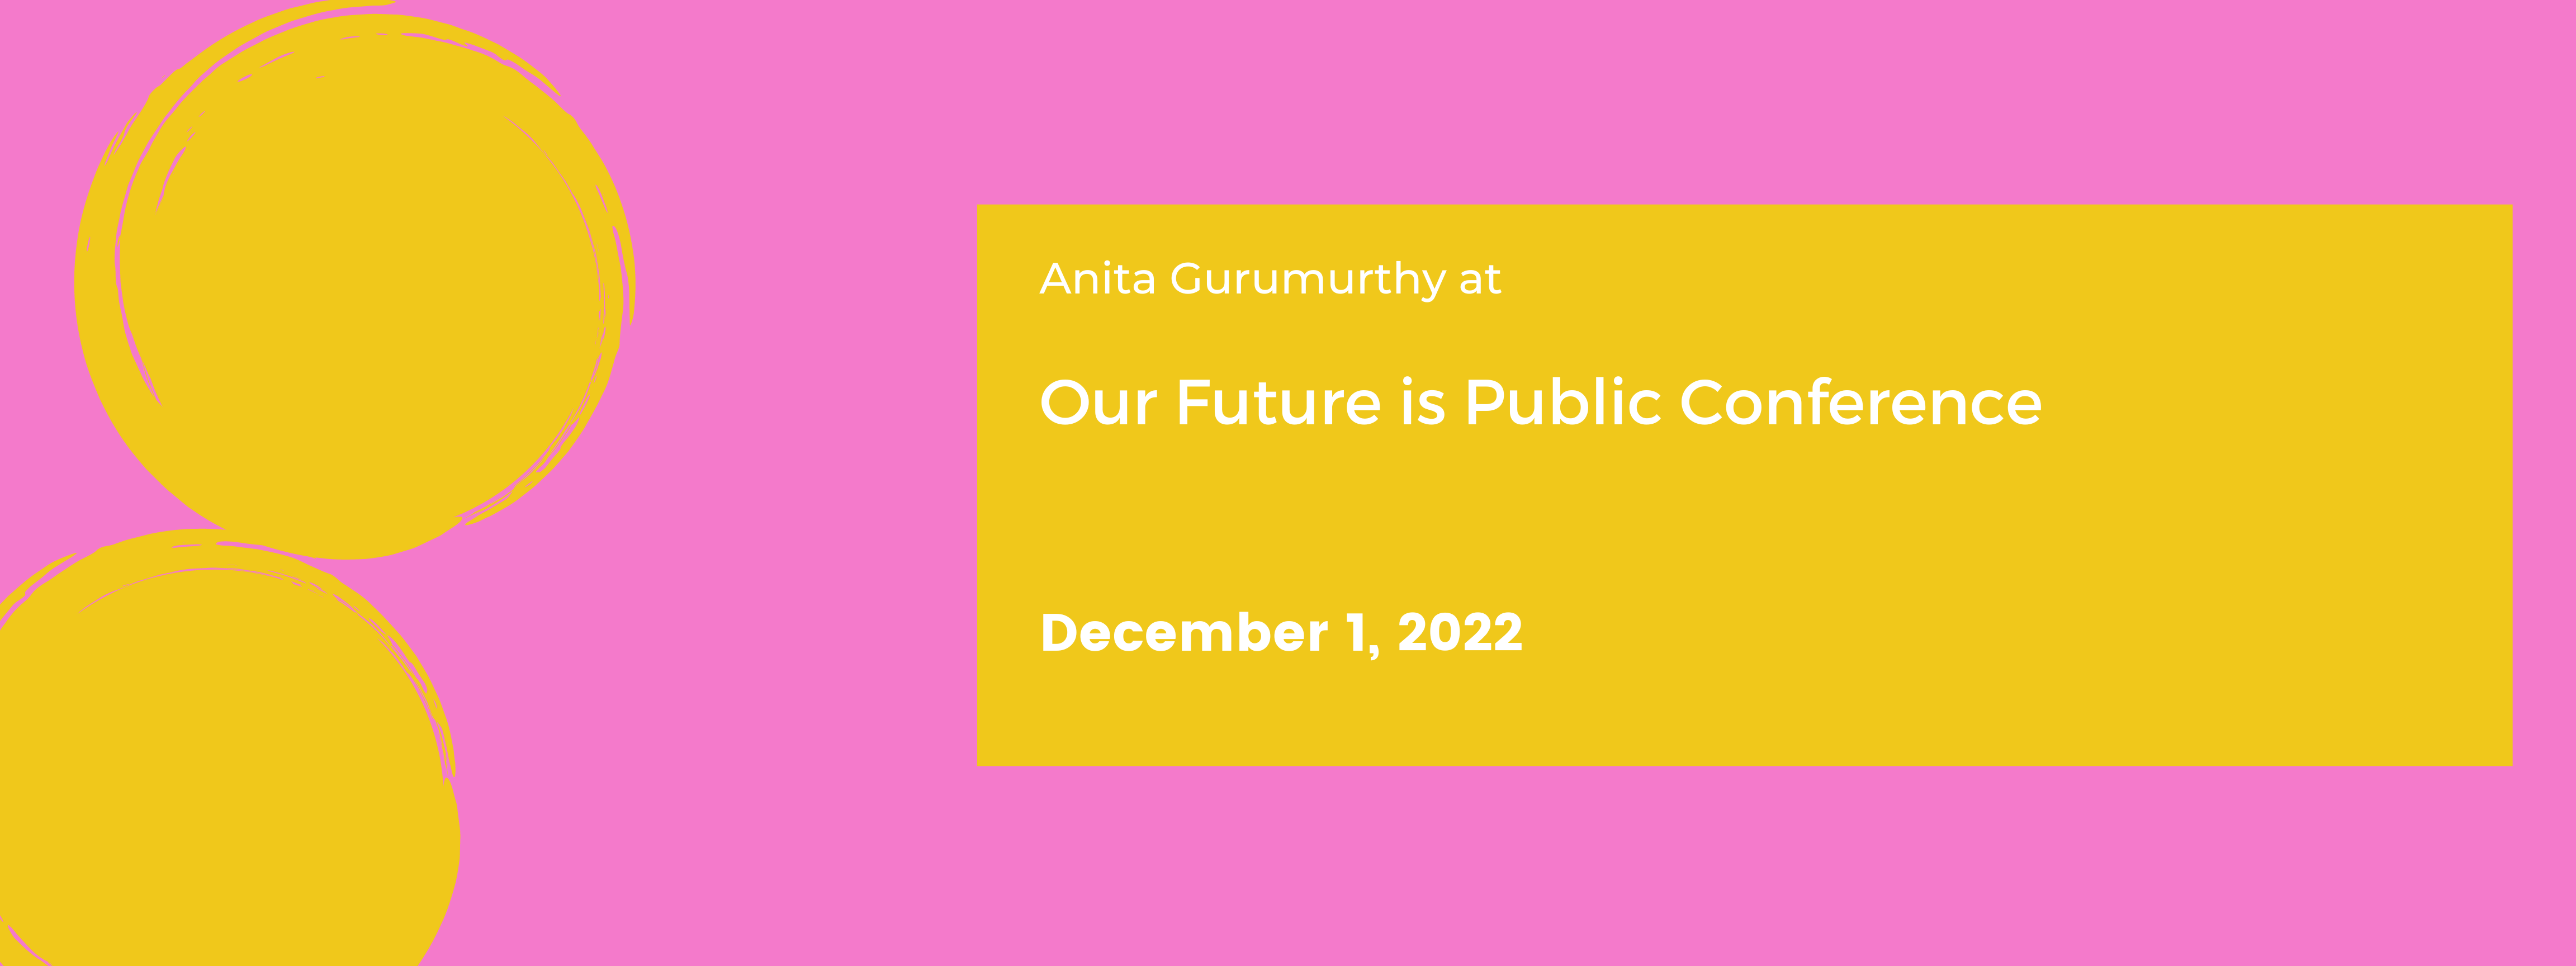 Our Future is Public